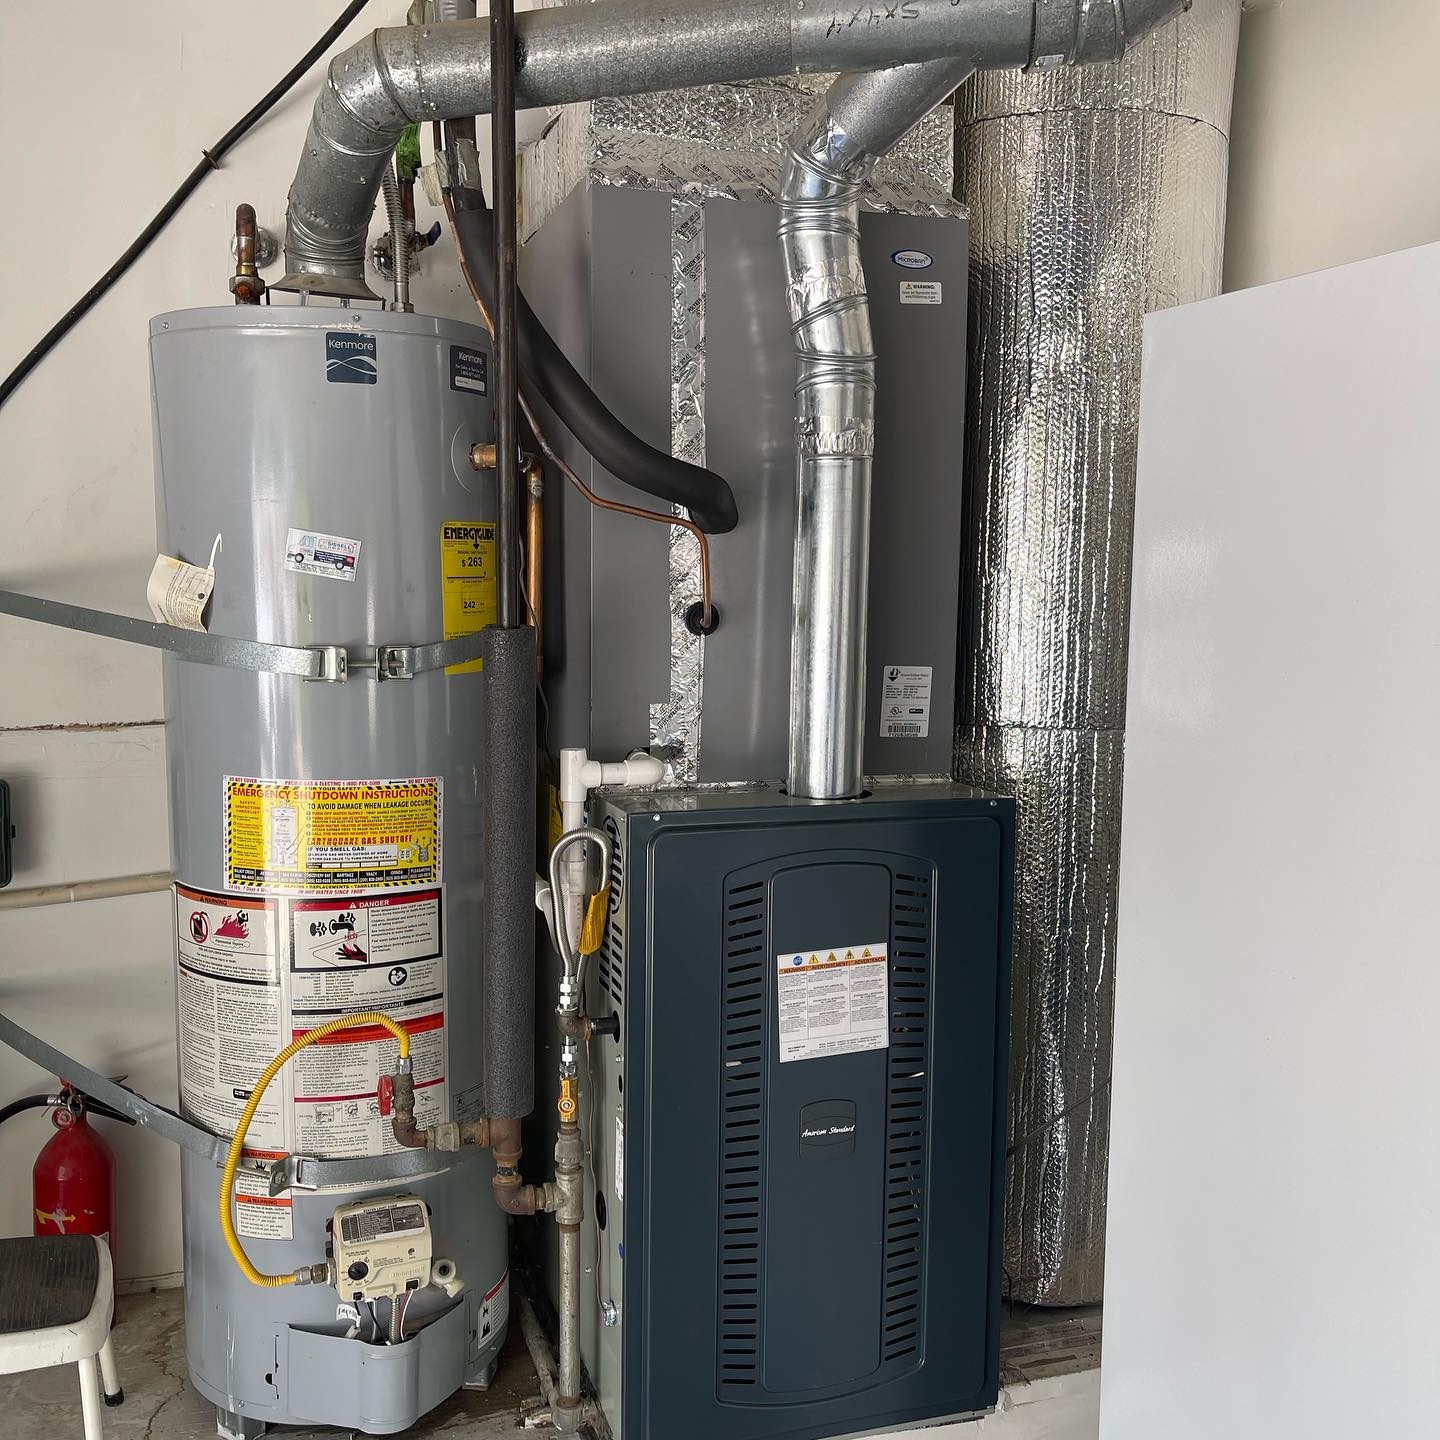 Newly installed furnace in a garage in Patterson, California